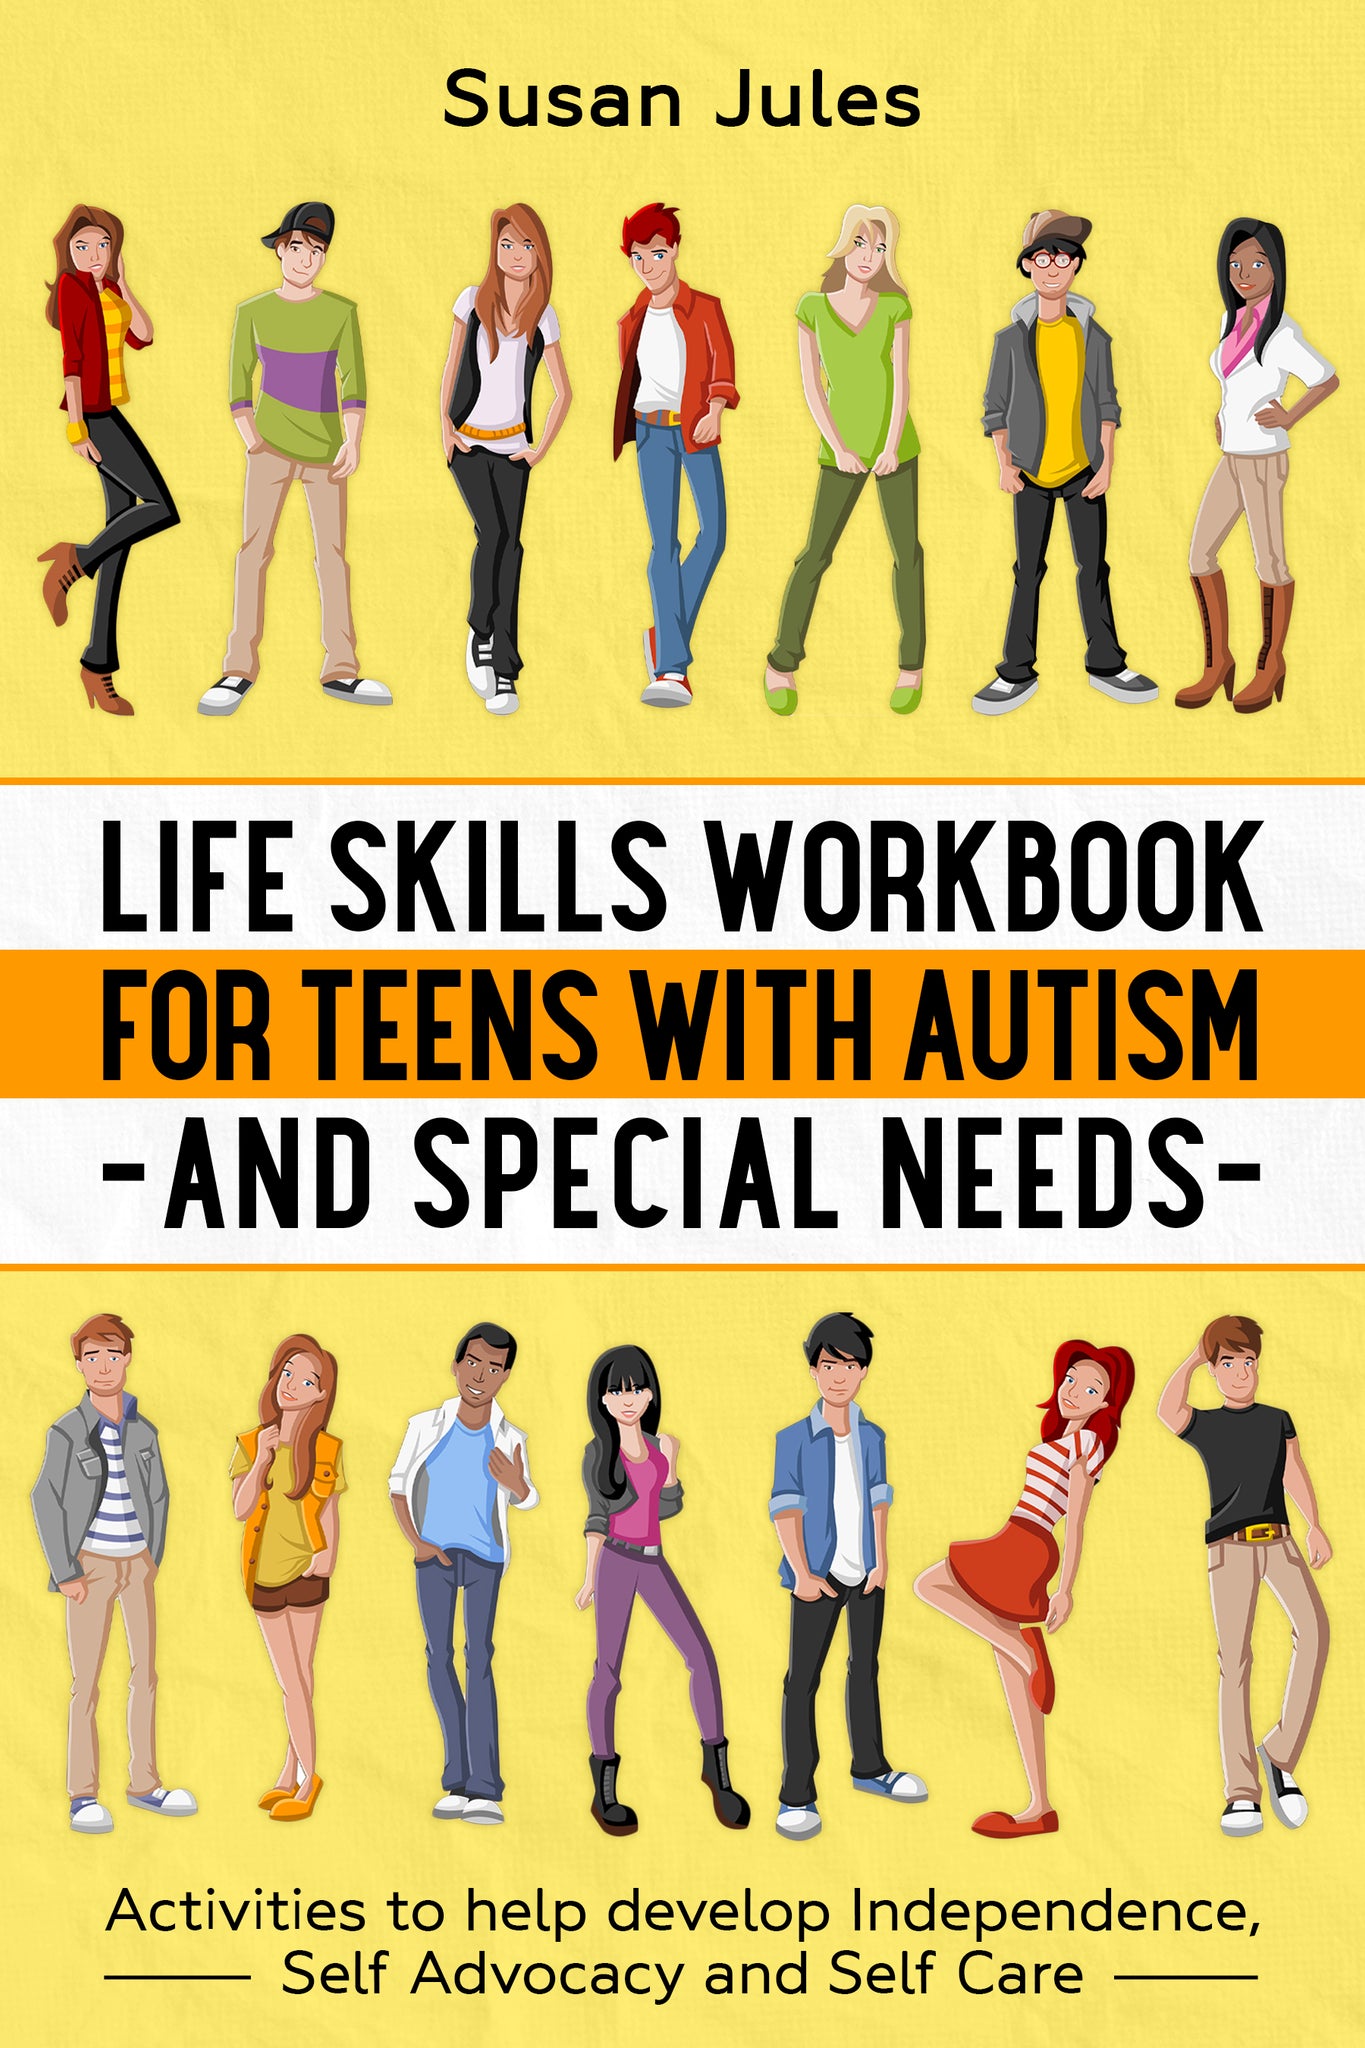 Life Skills Workbook for Teens with Autism and Special Needs